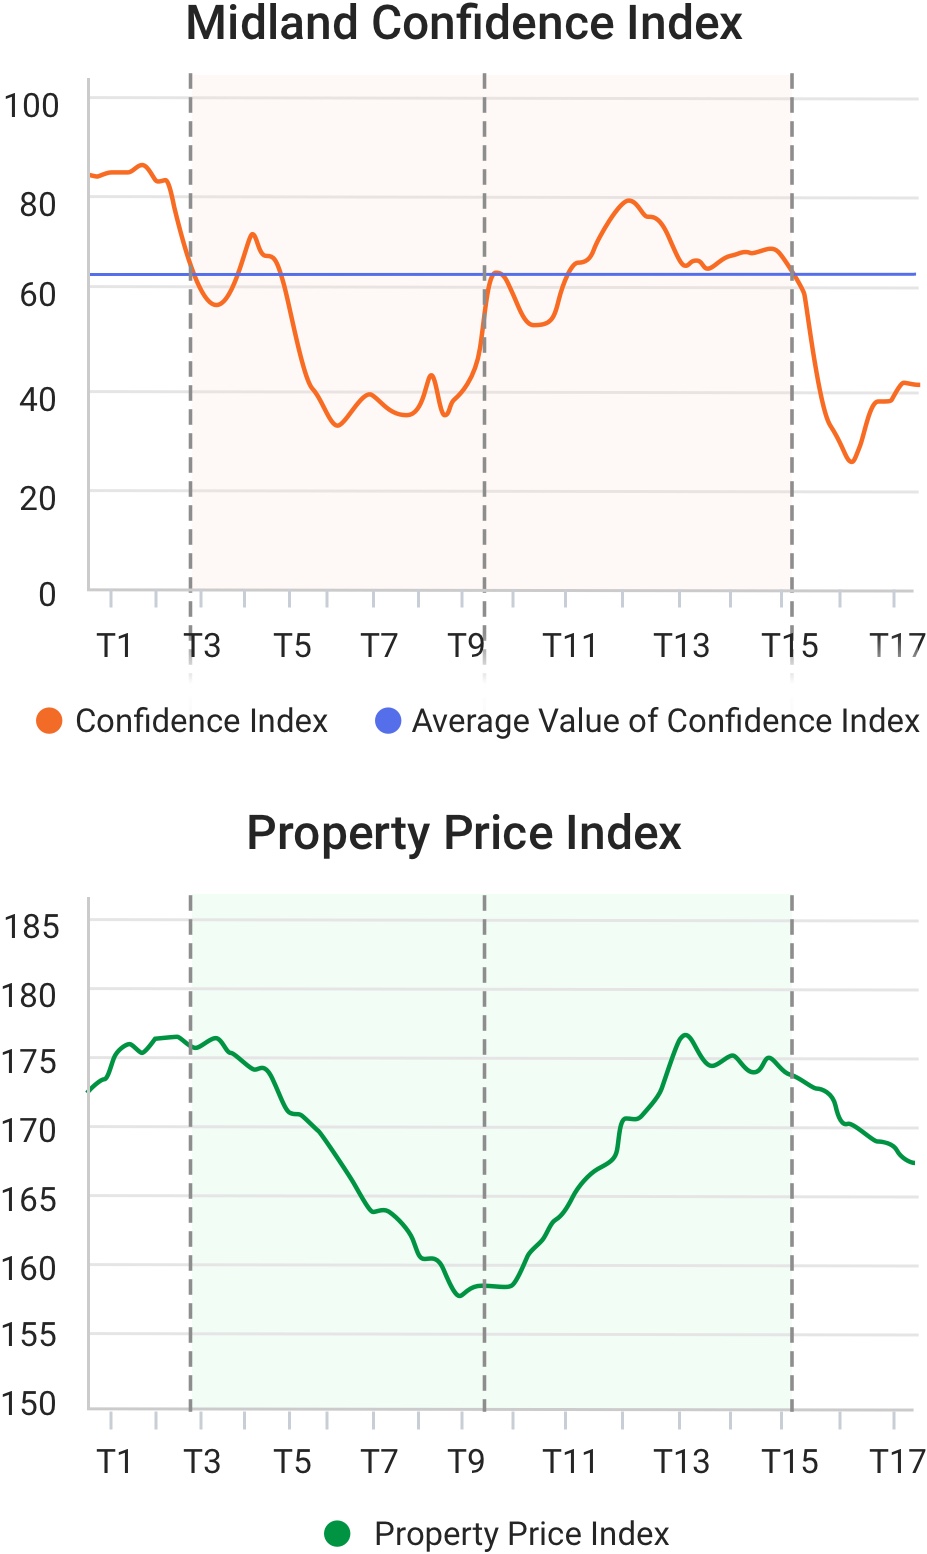 A brief introduction of the Midland Confidence Index